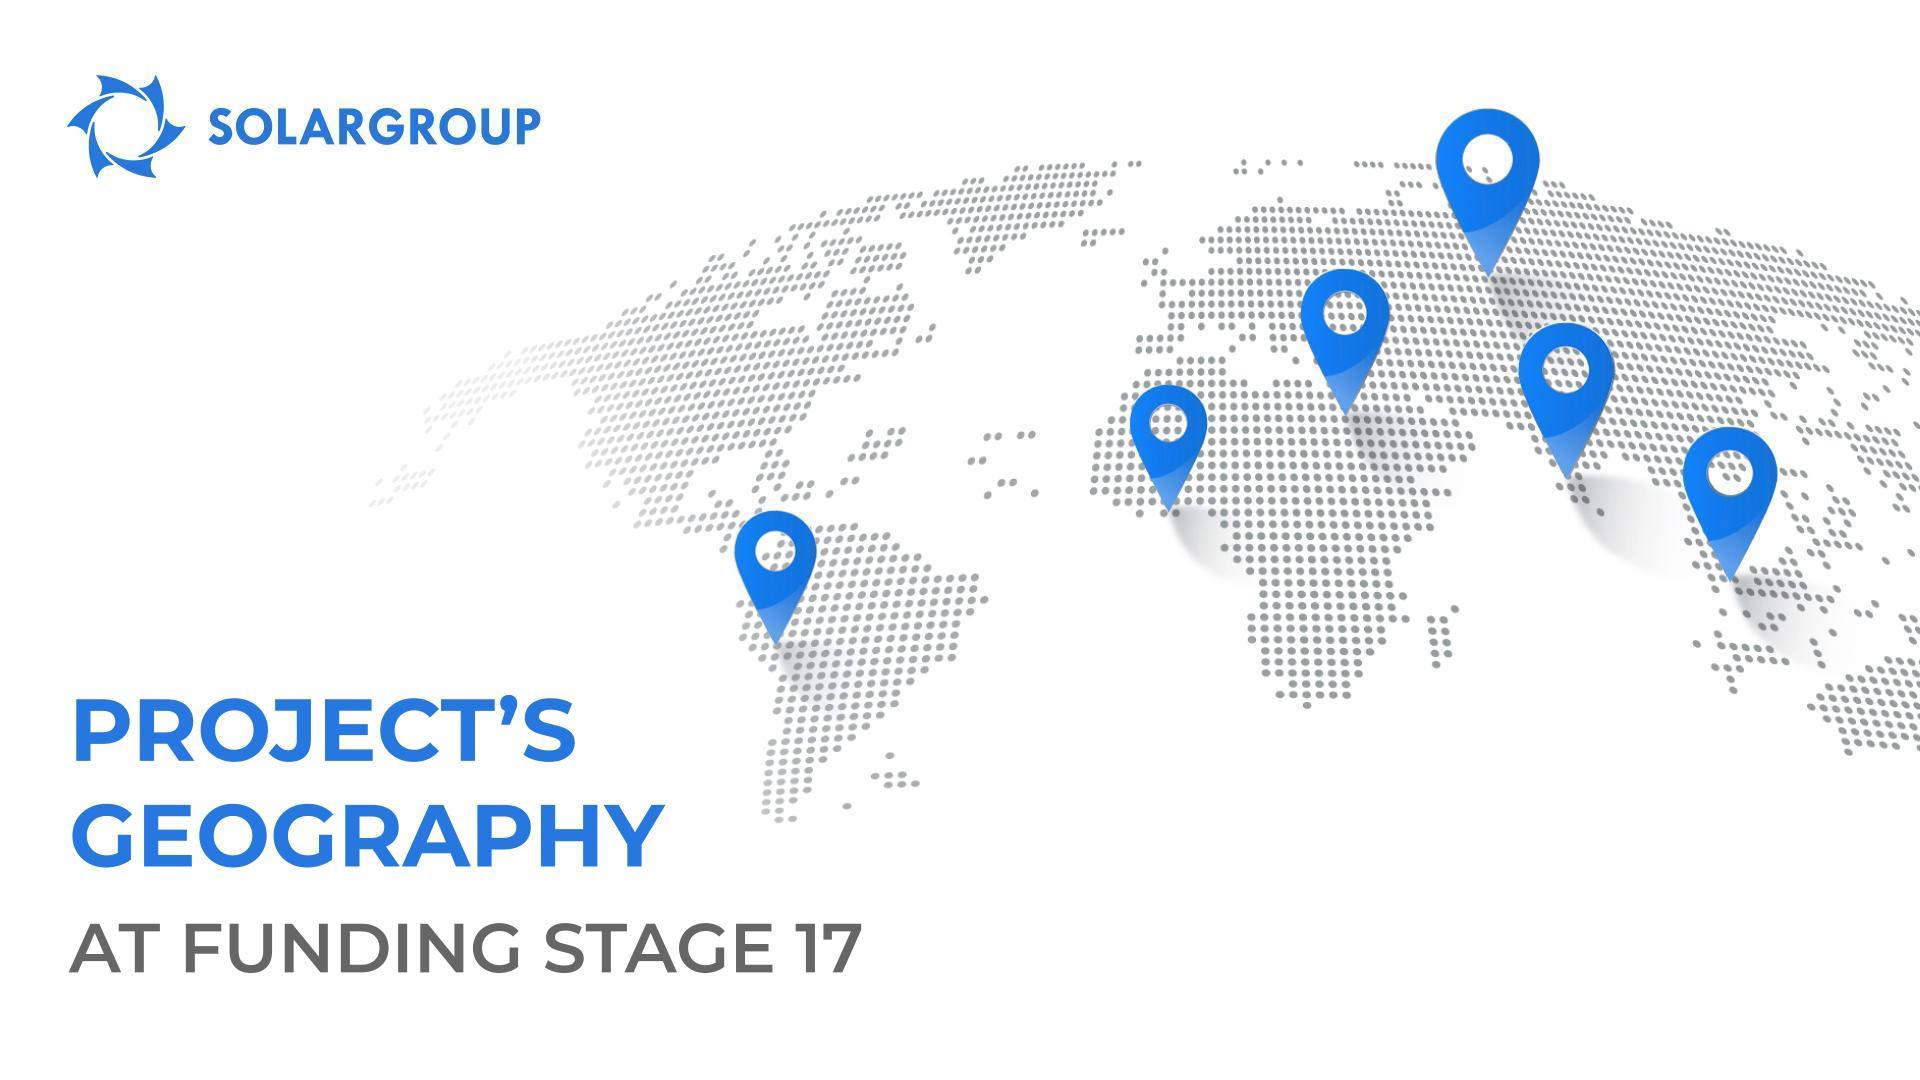 Project's geography at funding stage 17